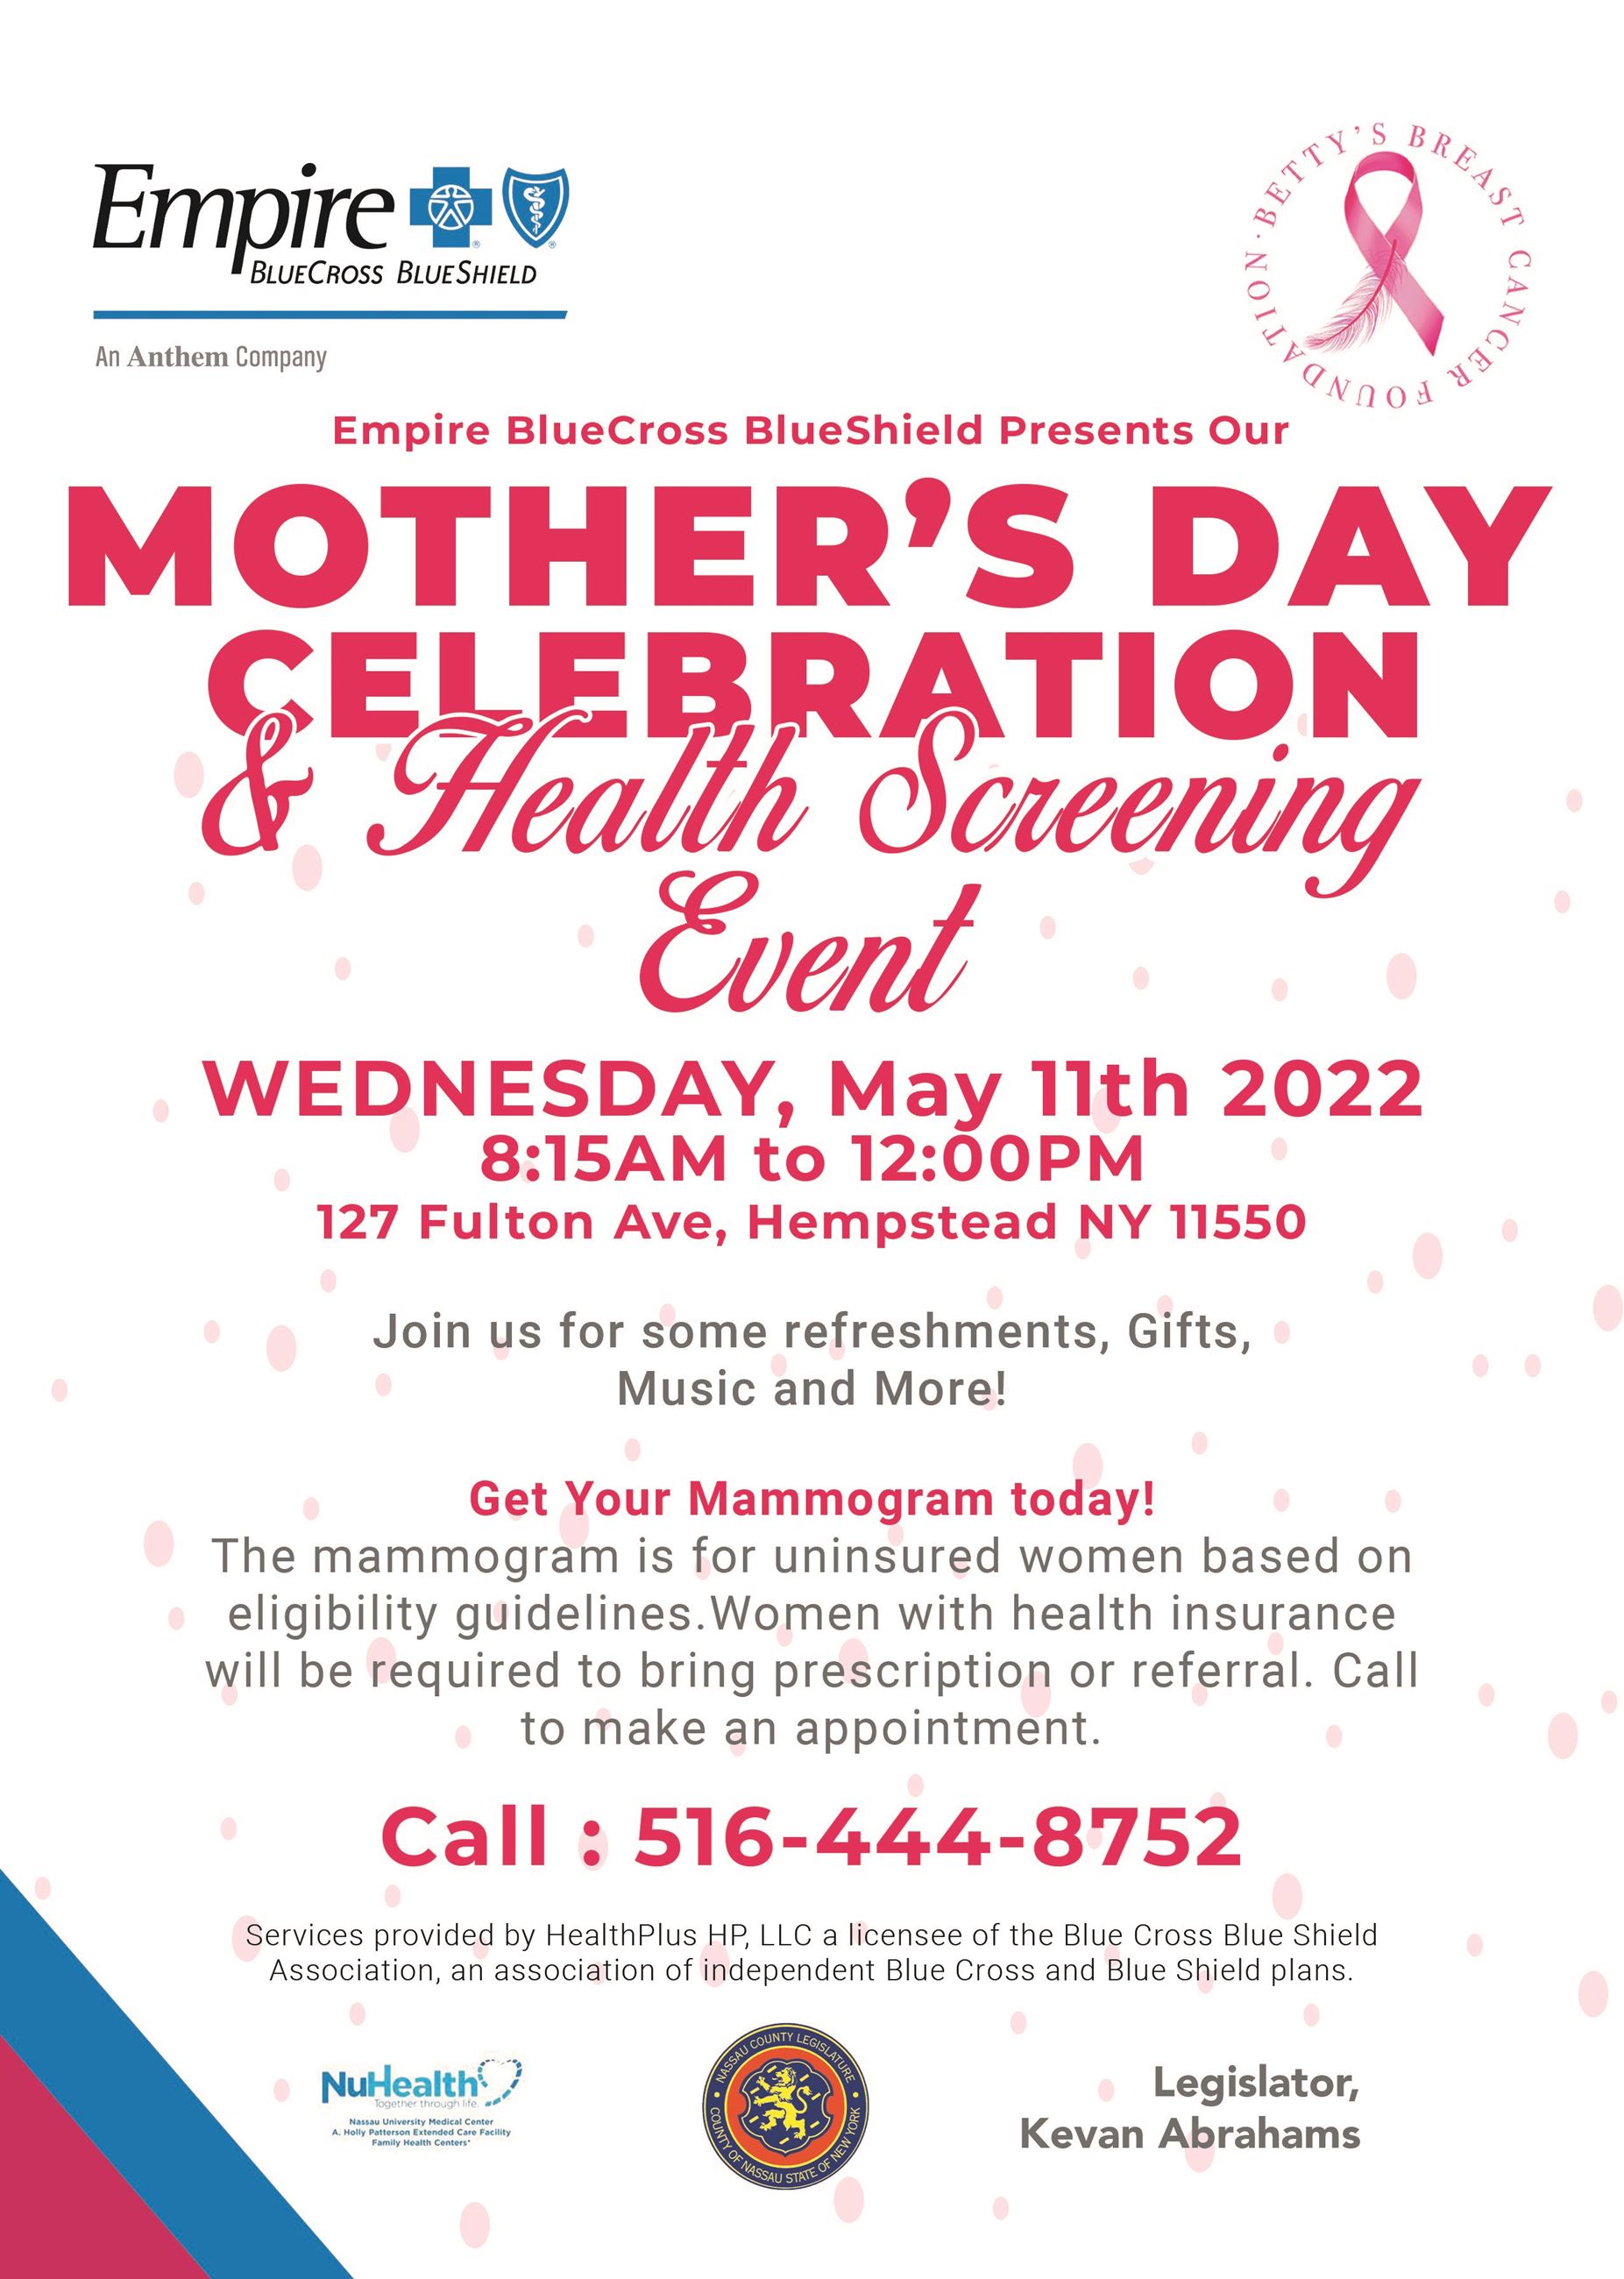 Mothers day event flyer English 51122. Update